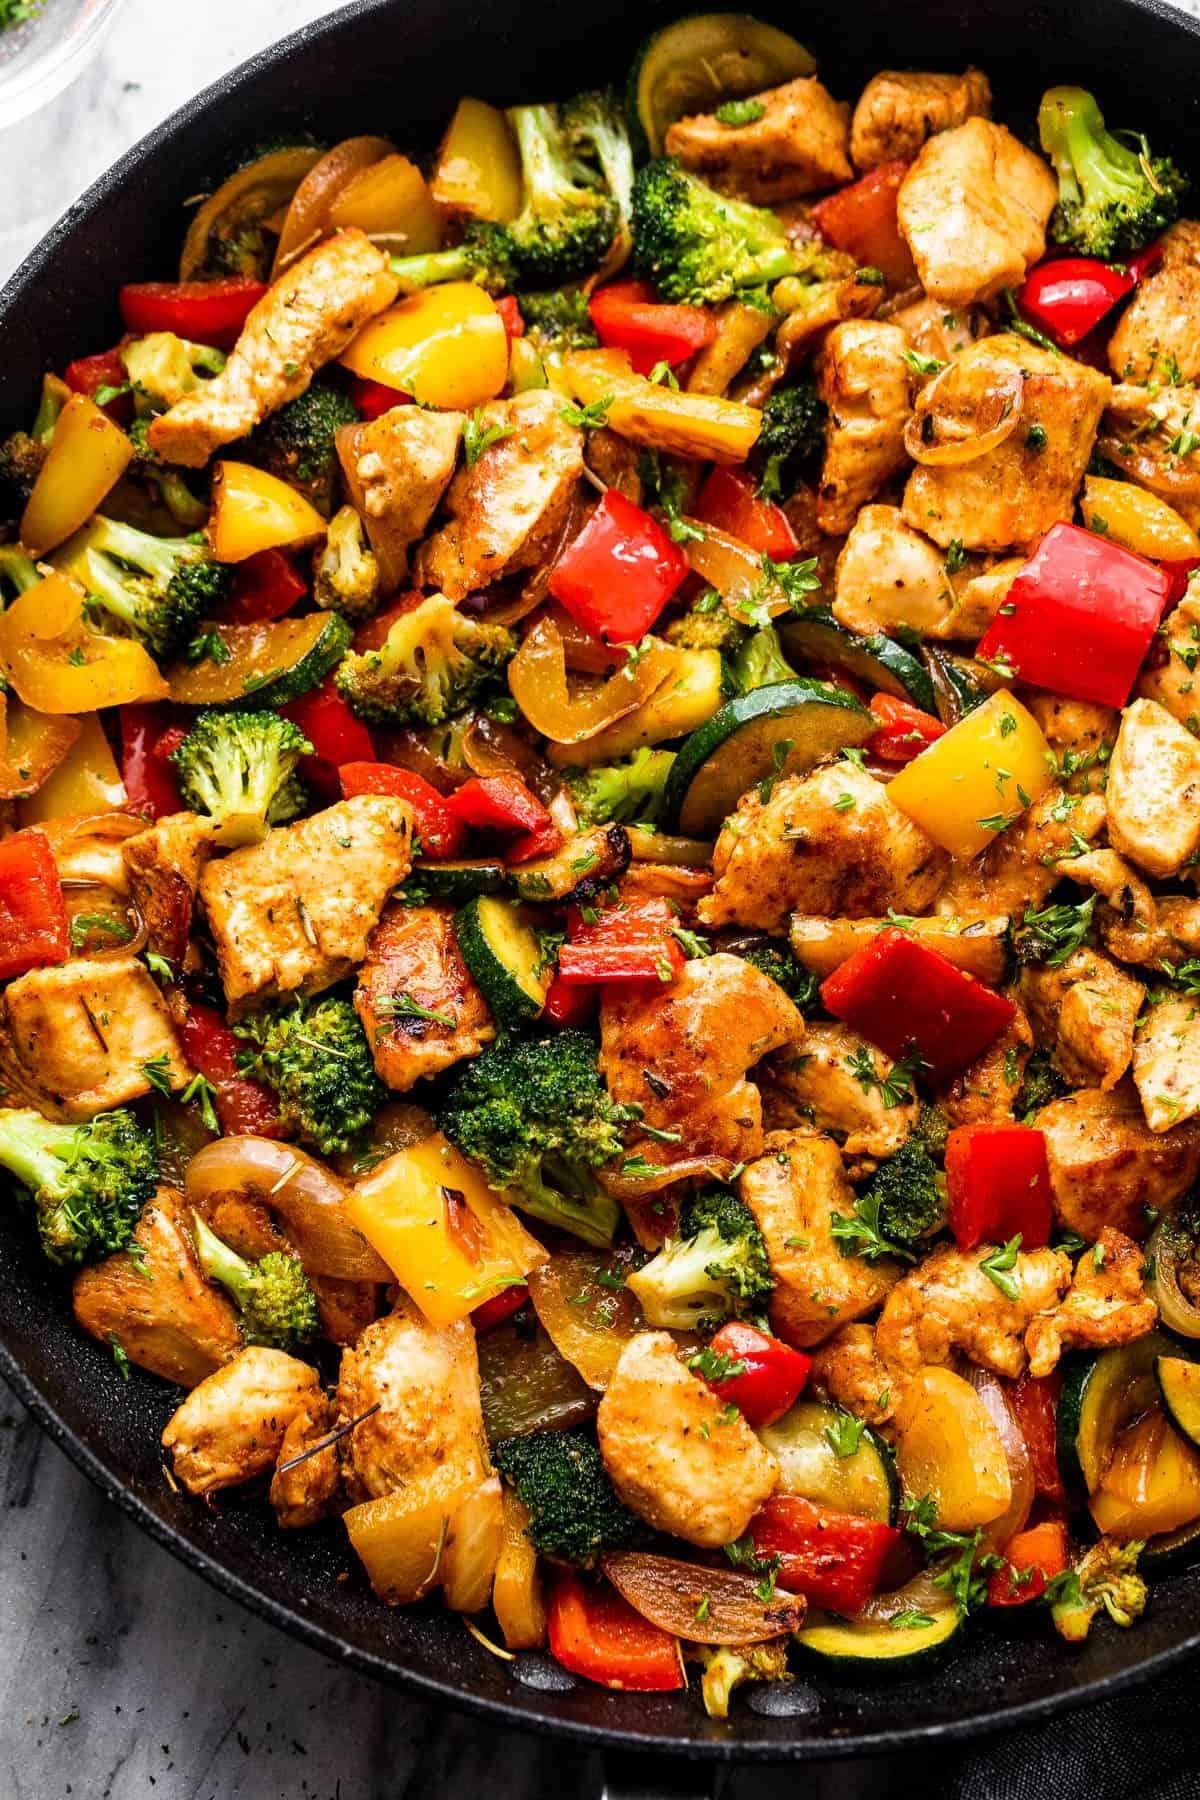 Comfort Food Meets Healthy Eats: The Ultimate Chicken and Veggie One-Pot Recipe